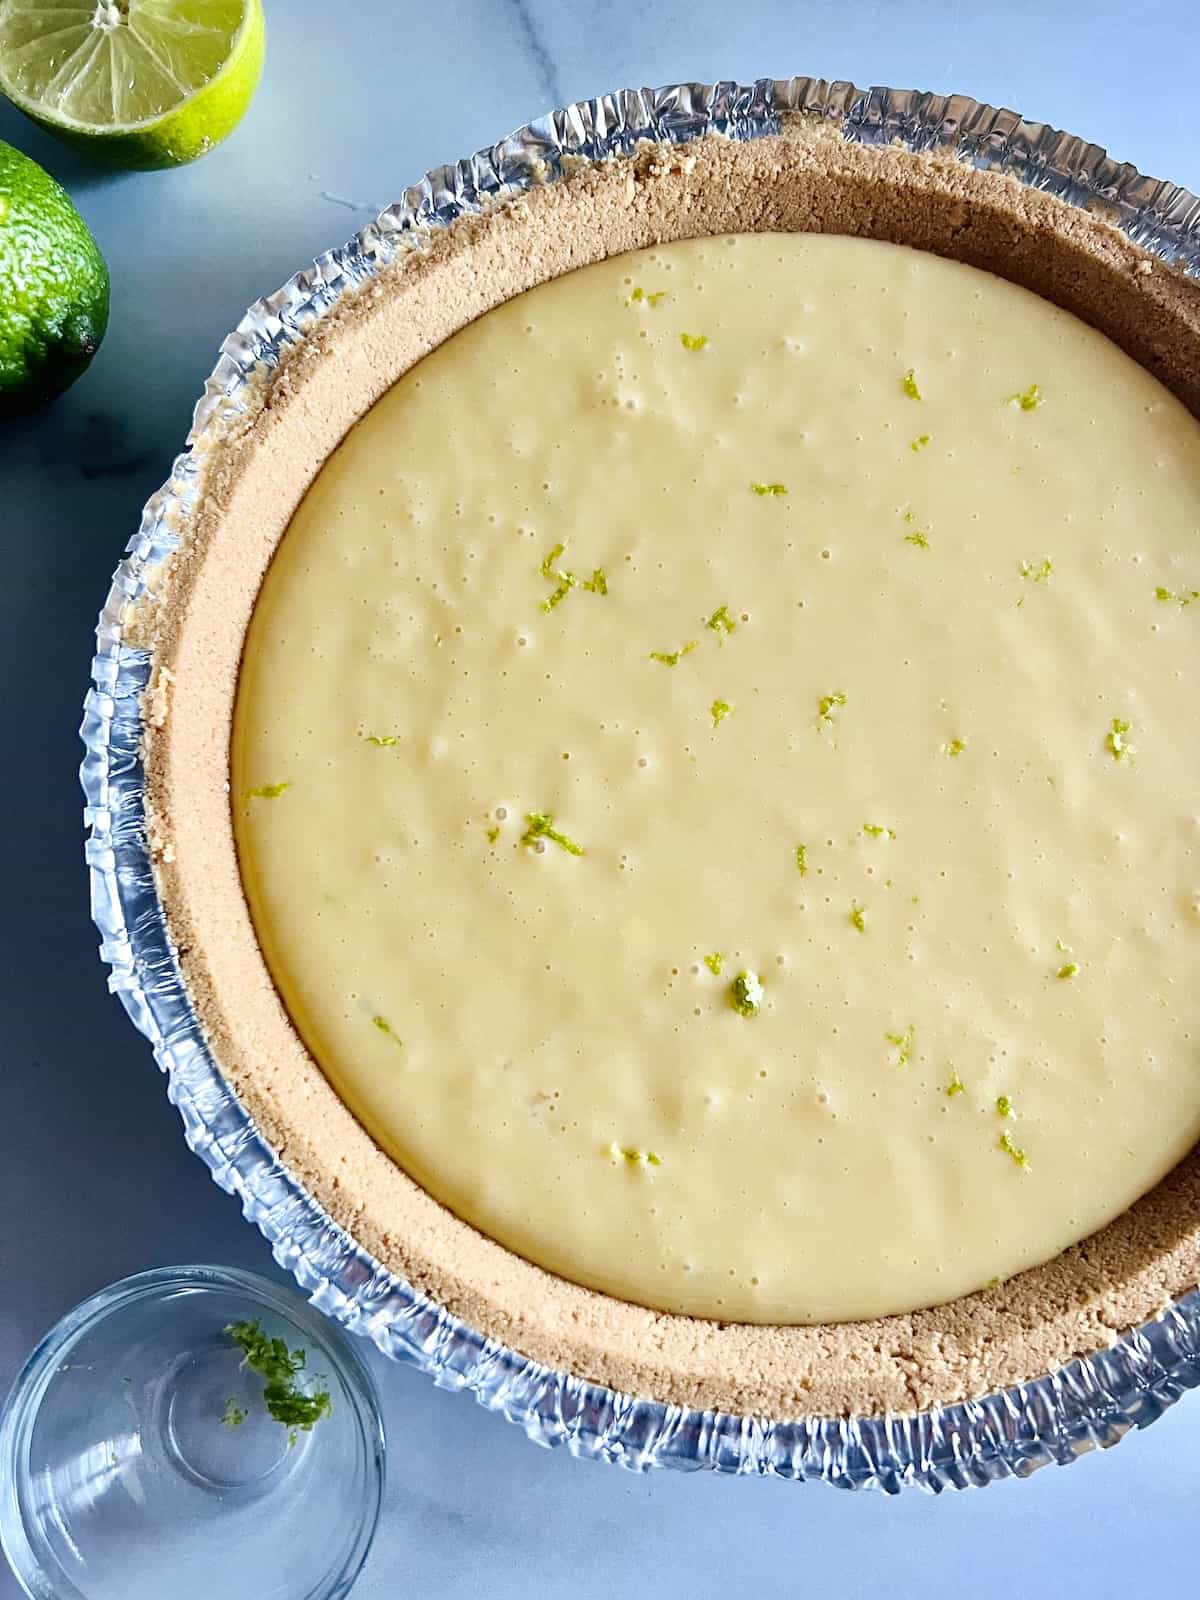 Pie Crust filled with key lime filling and topped with a sprinkle of zest.